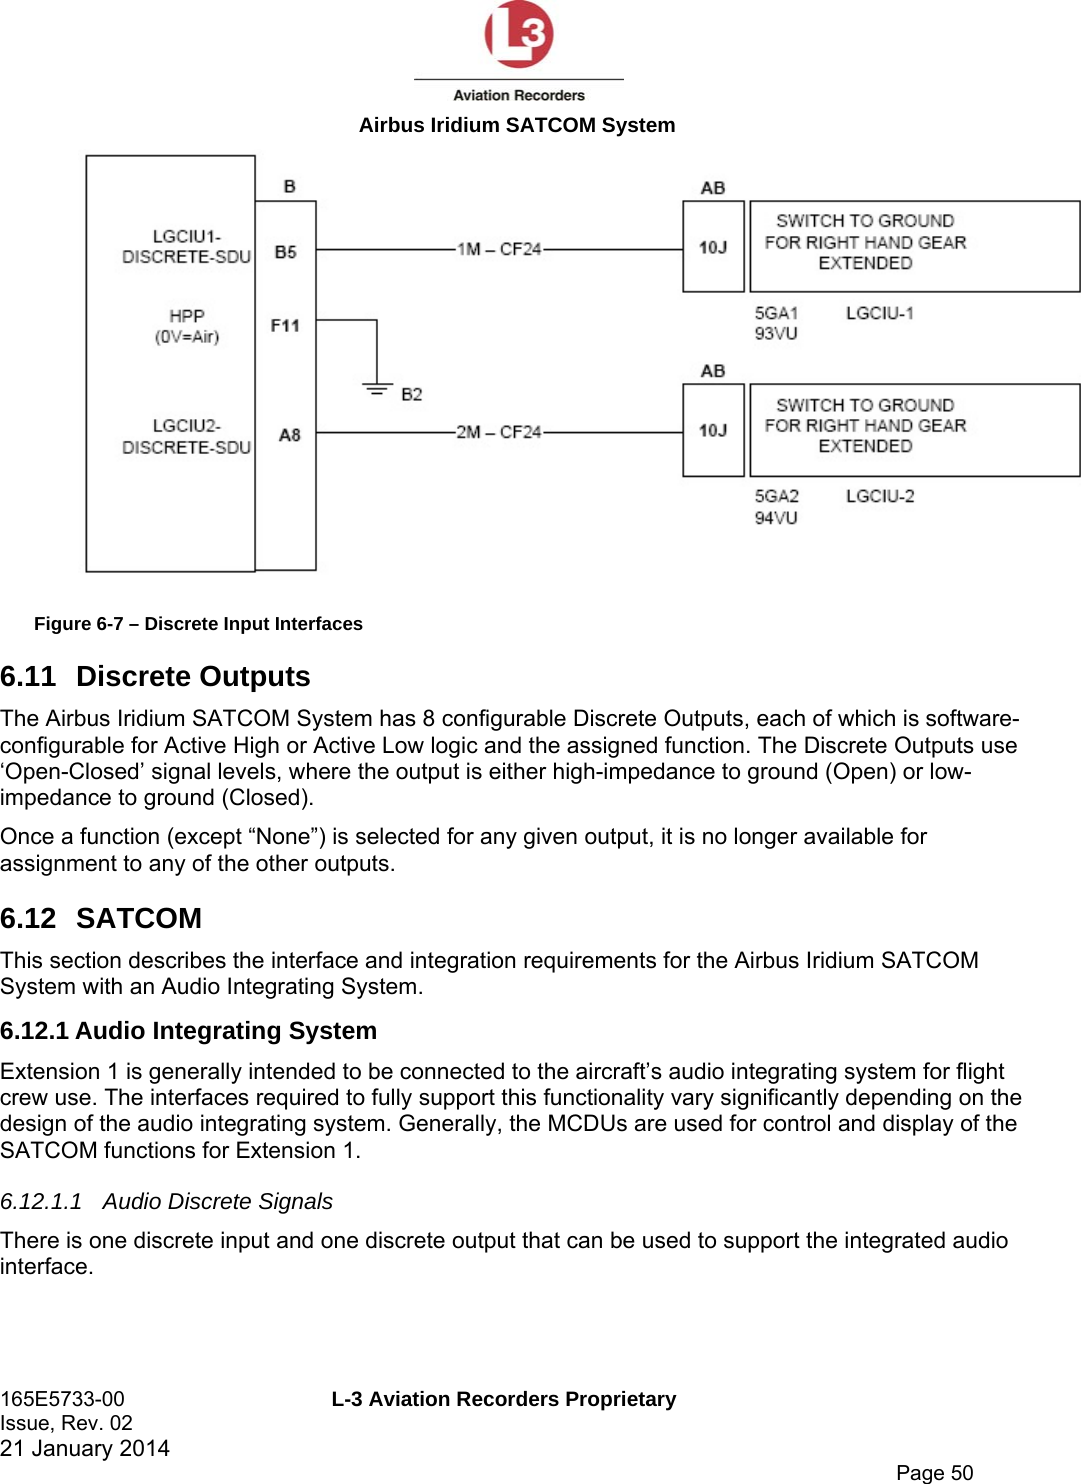  Airbus Iridium SATCOM System 165E5733-00  L-3 Aviation Recorders Proprietary Issue, Rev. 02   21 January 2014      Page 50  Figure 6-7 – Discrete Input Interfaces 6.11   Discrete Outputs The Airbus Iridium SATCOM System has 8 configurable Discrete Outputs, each of which is software-configurable for Active High or Active Low logic and the assigned function. The Discrete Outputs use ‘Open-Closed’ signal levels, where the output is either high-impedance to ground (Open) or low-impedance to ground (Closed). Once a function (except “None”) is selected for any given output, it is no longer available for assignment to any of the other outputs. 6.12   SATCOM This section describes the interface and integration requirements for the Airbus Iridium SATCOM System with an Audio Integrating System. 6.12.1 Audio Integrating System Extension 1 is generally intended to be connected to the aircraft’s audio integrating system for flight crew use. The interfaces required to fully support this functionality vary significantly depending on the design of the audio integrating system. Generally, the MCDUs are used for control and display of the SATCOM functions for Extension 1. 6.12.1.1  Audio Discrete Signals There is one discrete input and one discrete output that can be used to support the integrated audio interface.   